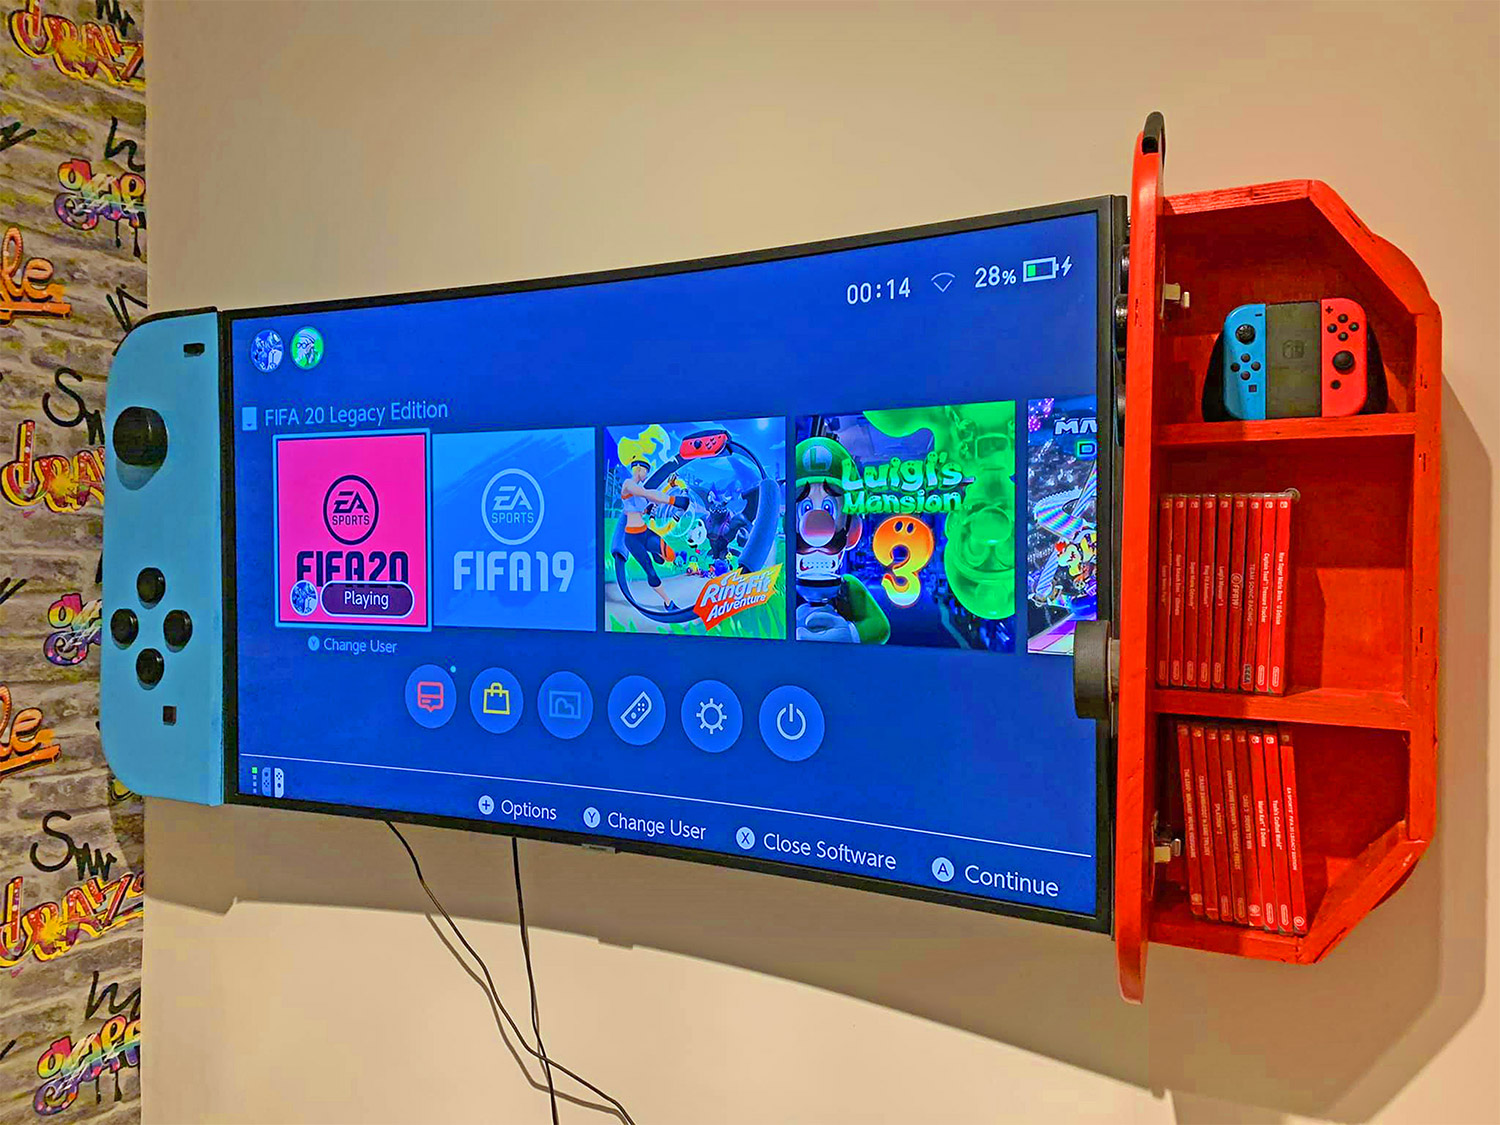 Wall-Mounted Cabinets Turn Your TV Into a Giant Nintendo Switch - Nintendo Switch TV Cabinets